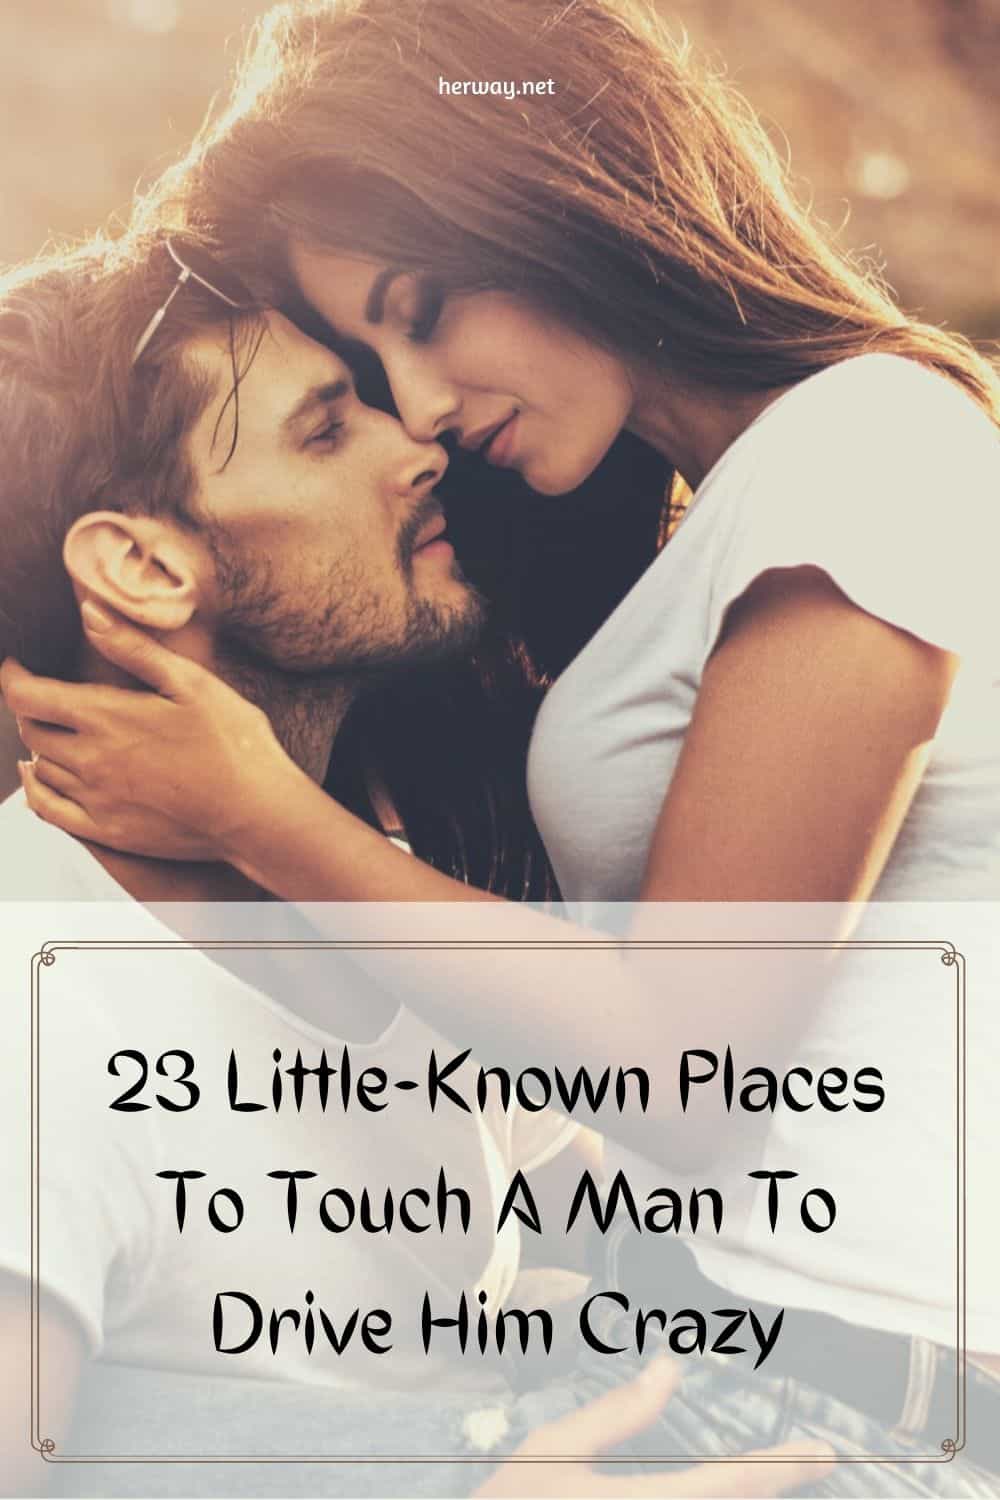 23 Little-Known Places To Touch A Man To Drive Him Crazy